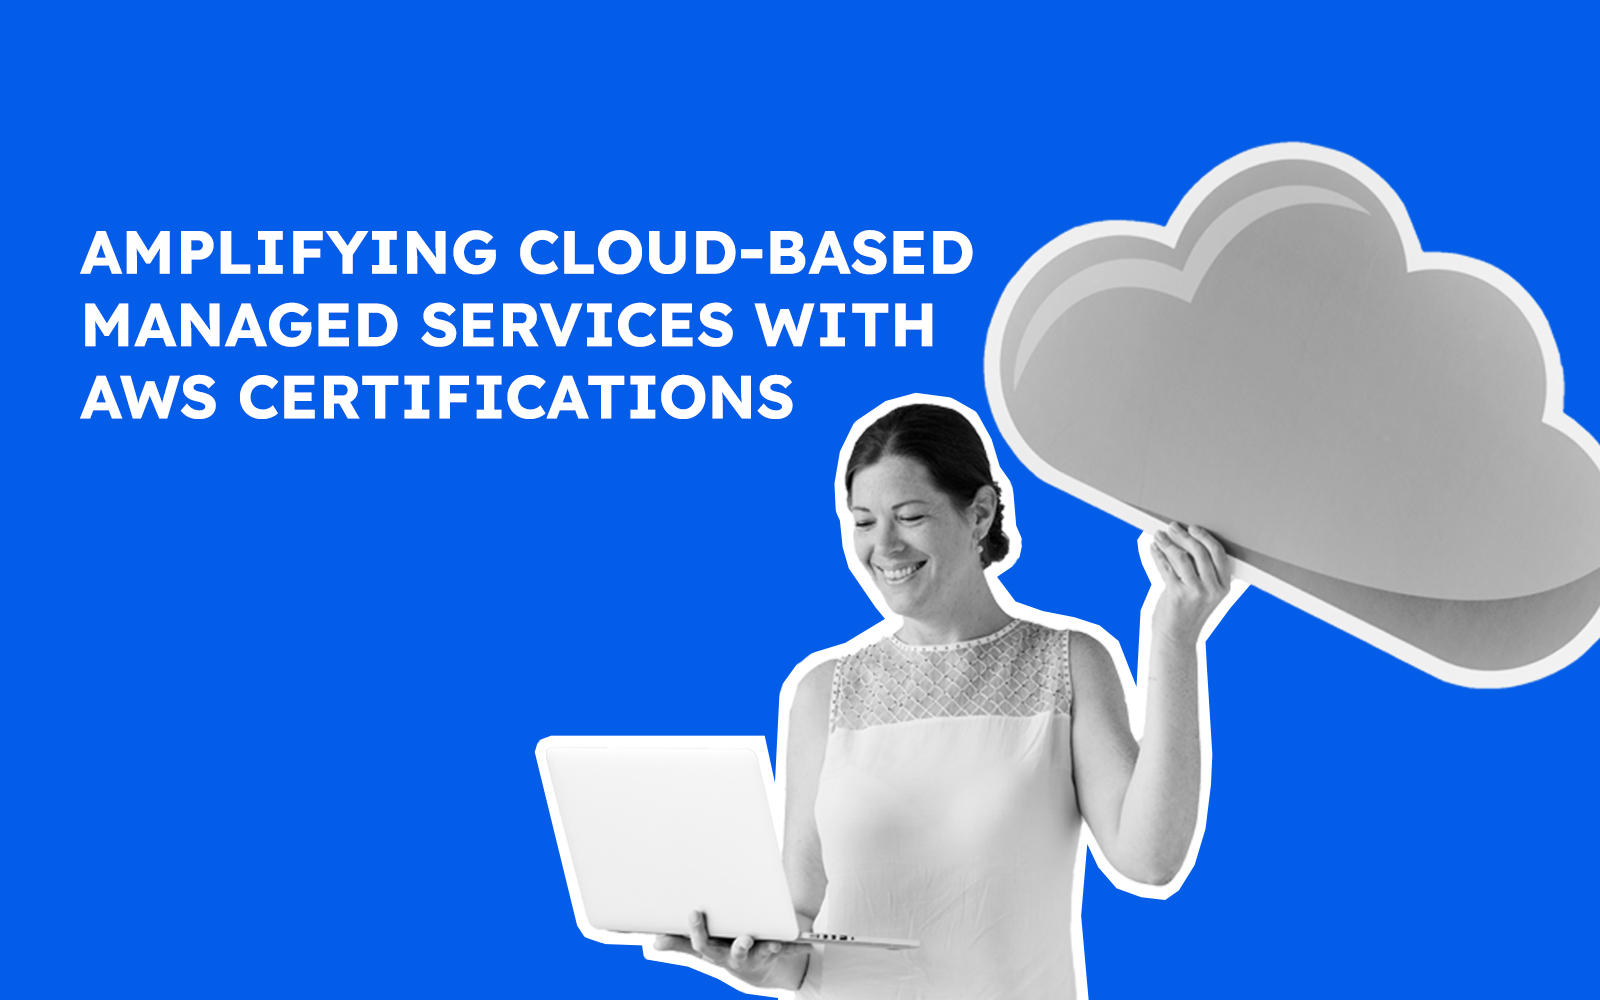 Amplifying Cloud-Based Managed Services with AWS Certifications